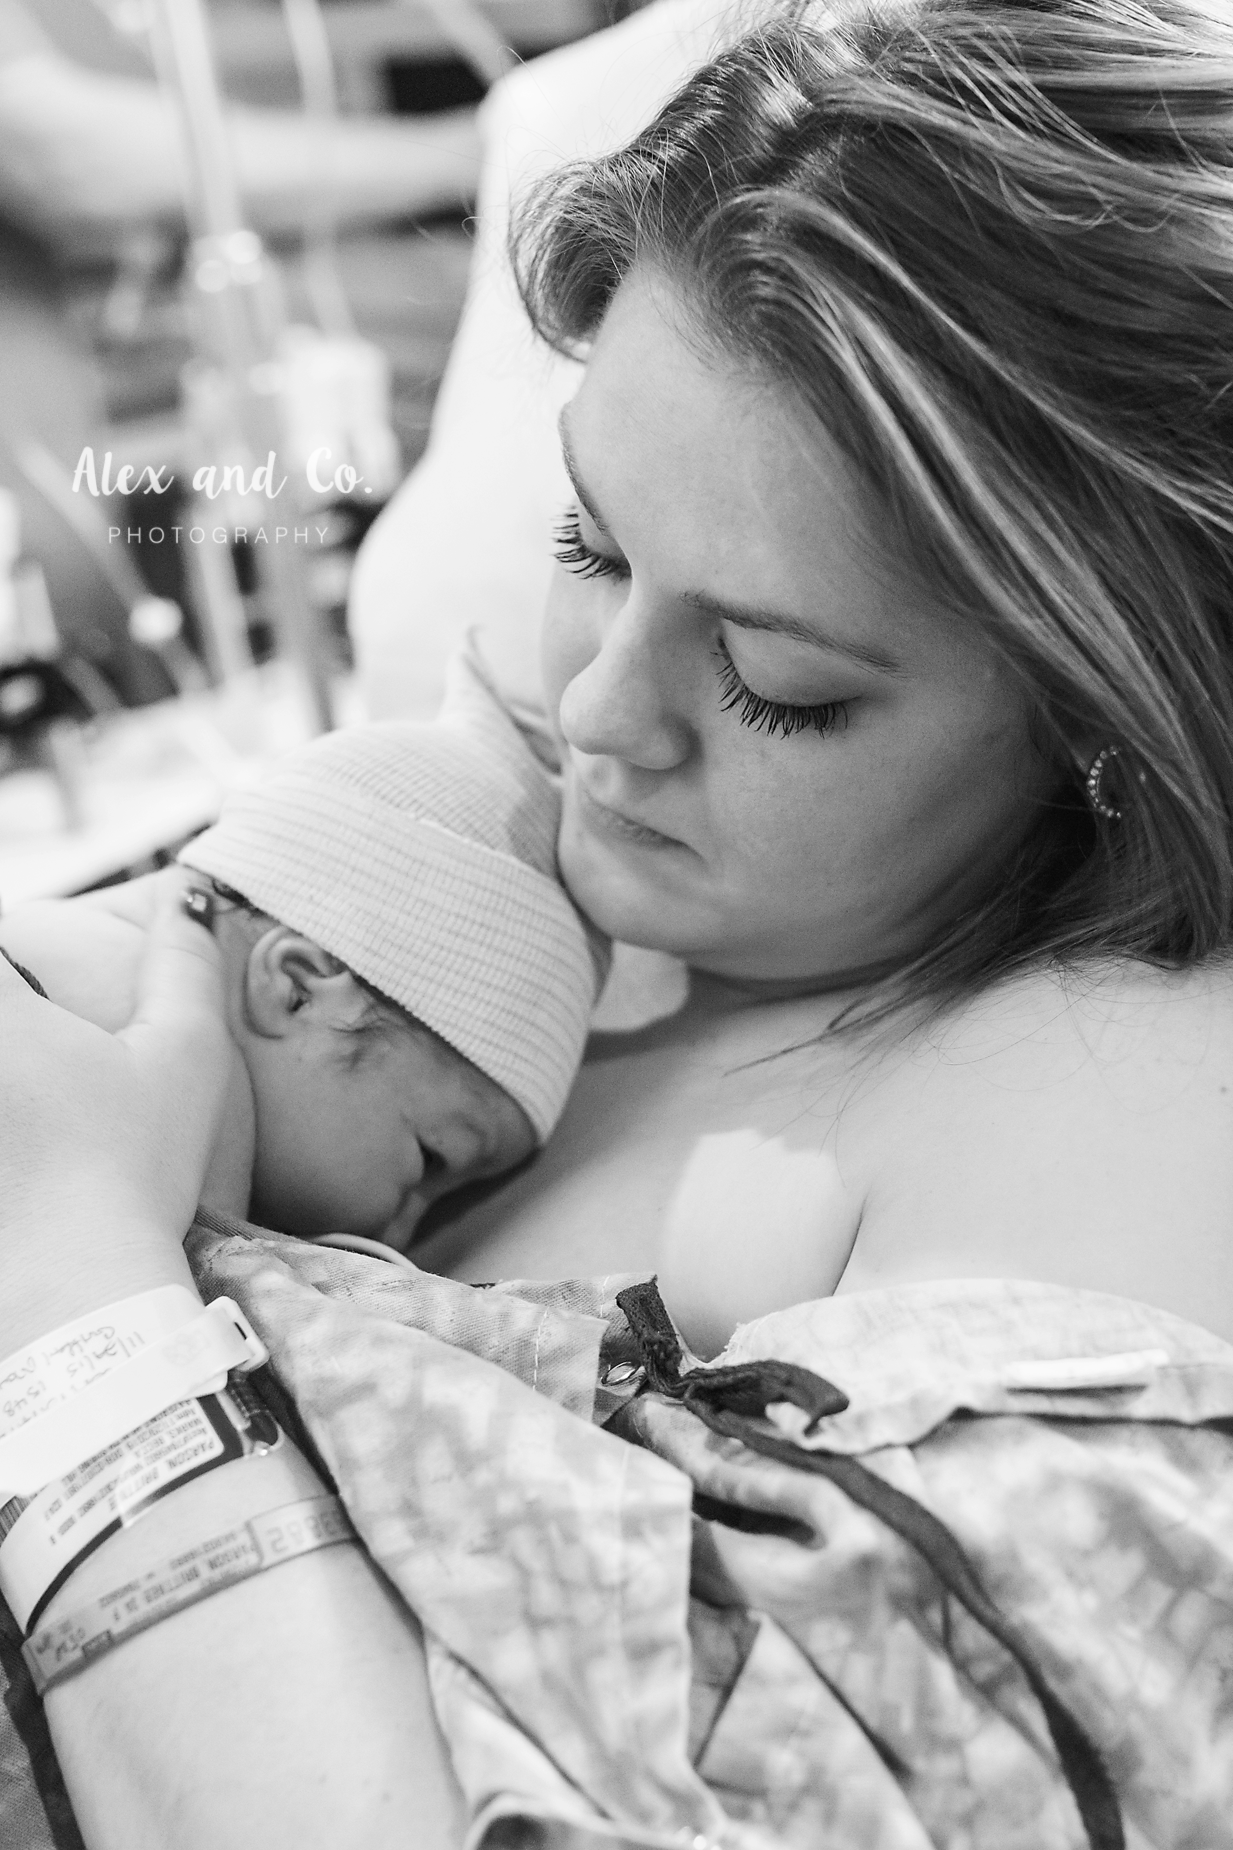 Tampa Bay Area Birth Photographer | Spring Hill FL | Alex and Co Photography